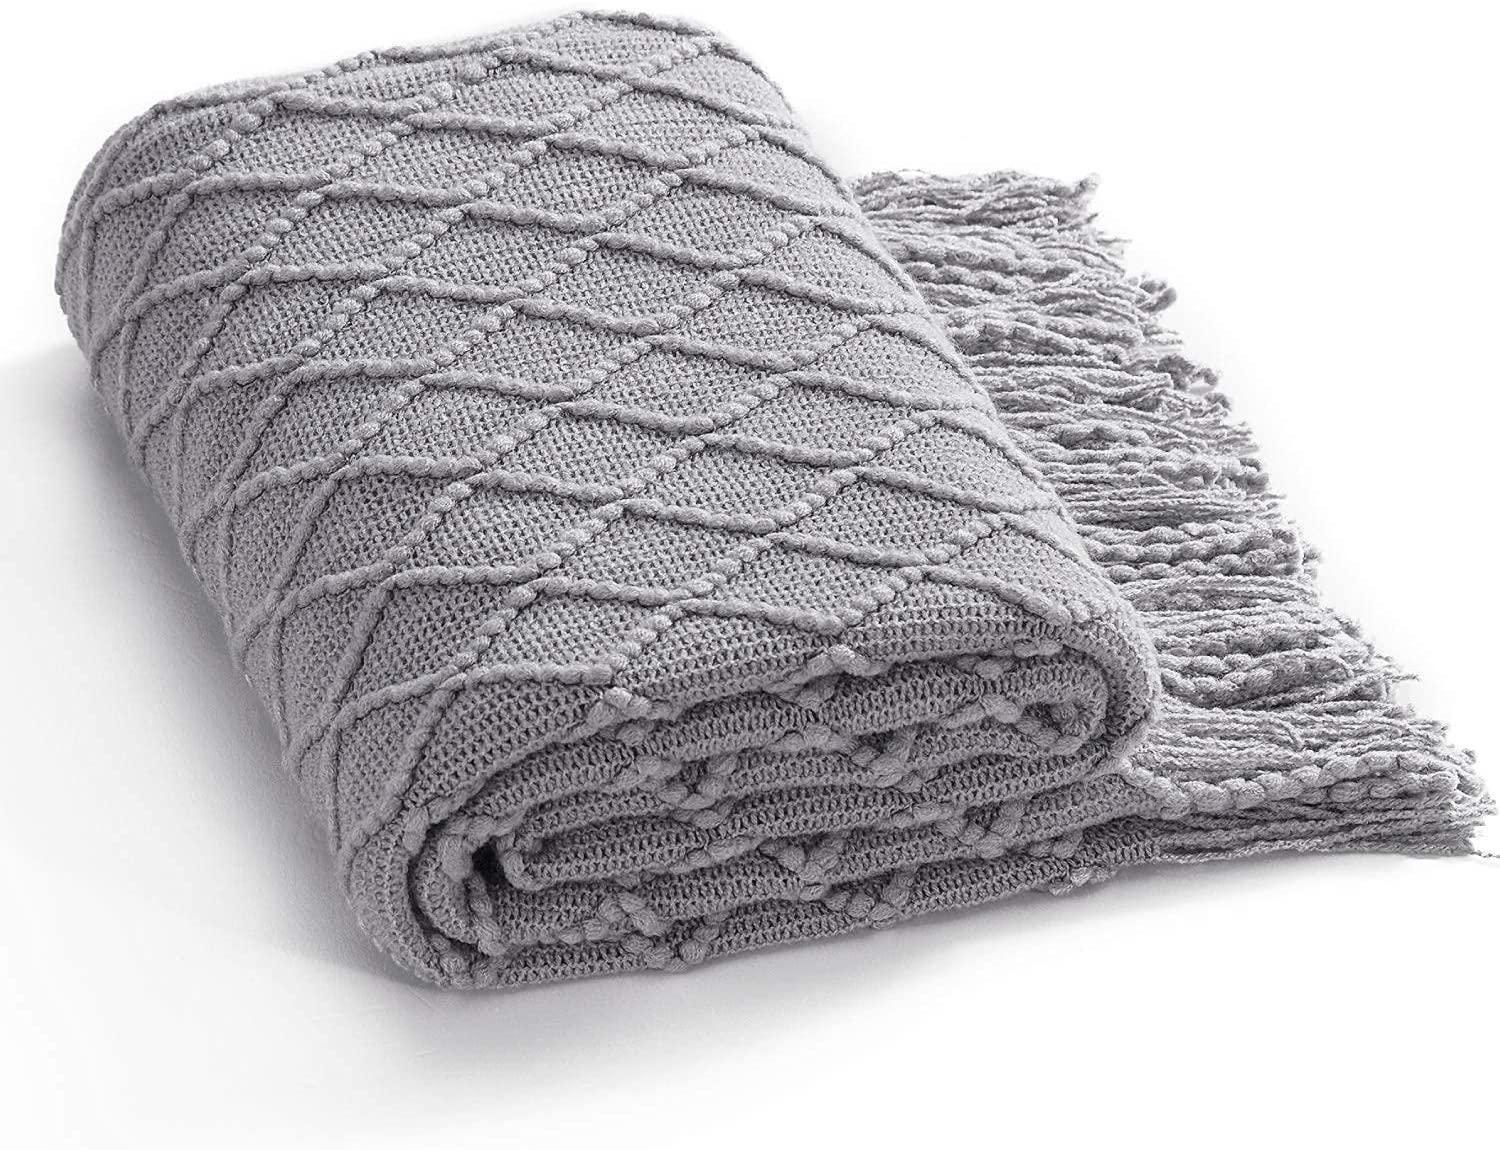 Bedsure Woven Knit Throw Blanket for $8